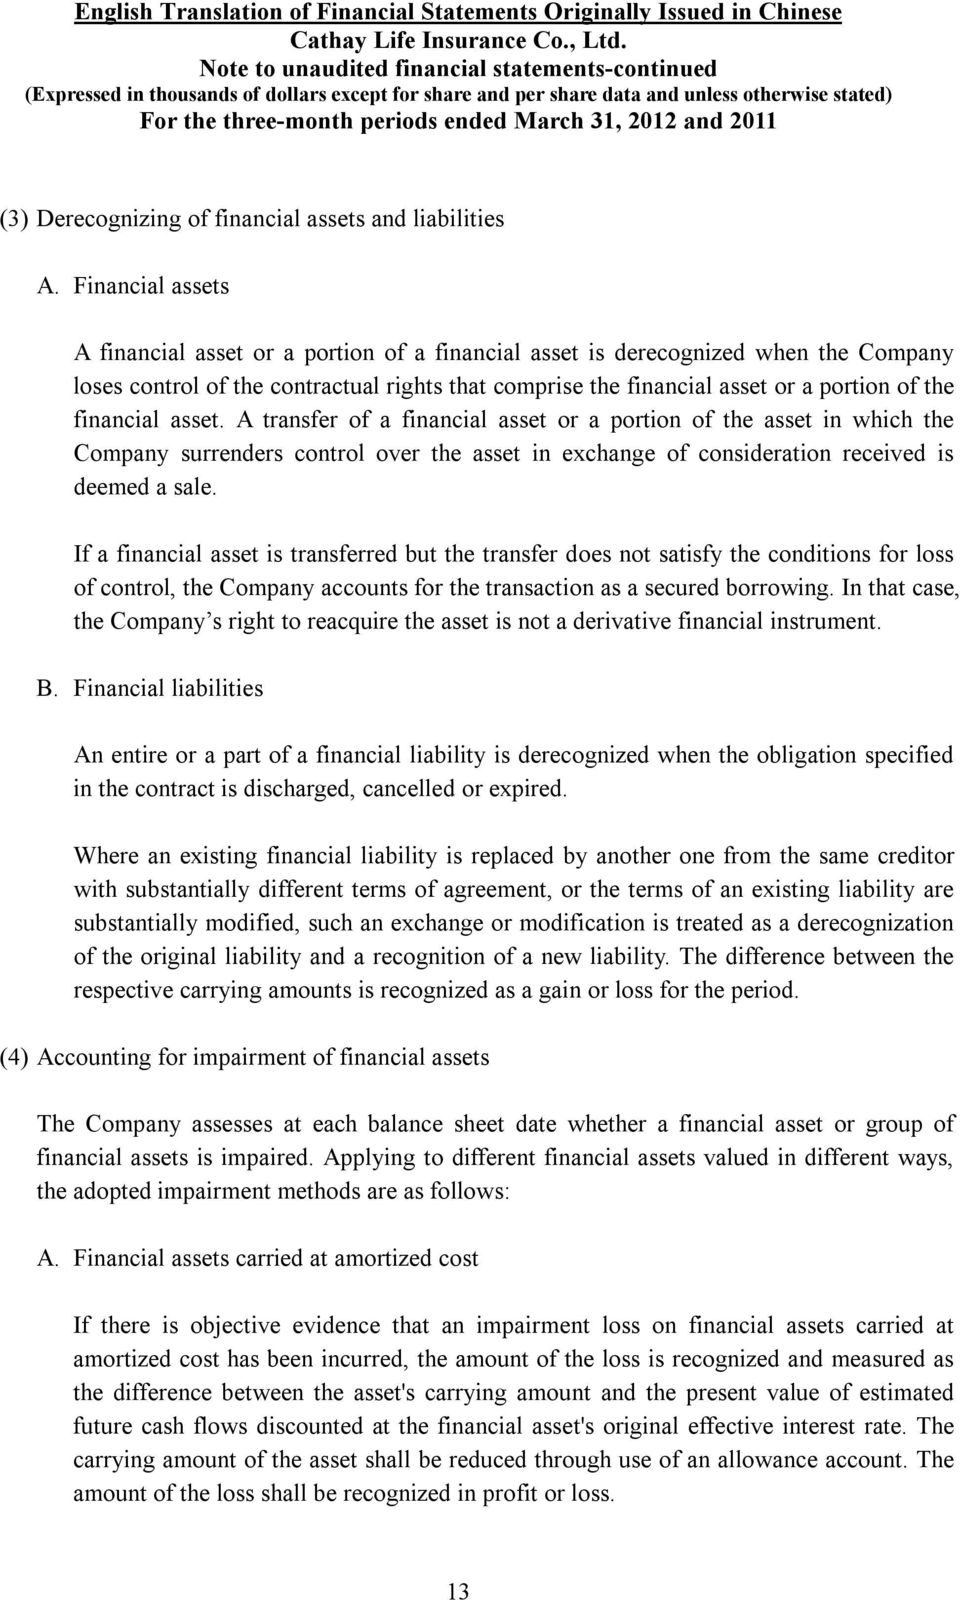 financial asset. A transfer of a financial asset or a portion of the asset in which the Company surrenders control over the asset in exchange of consideration received is deemed a sale.